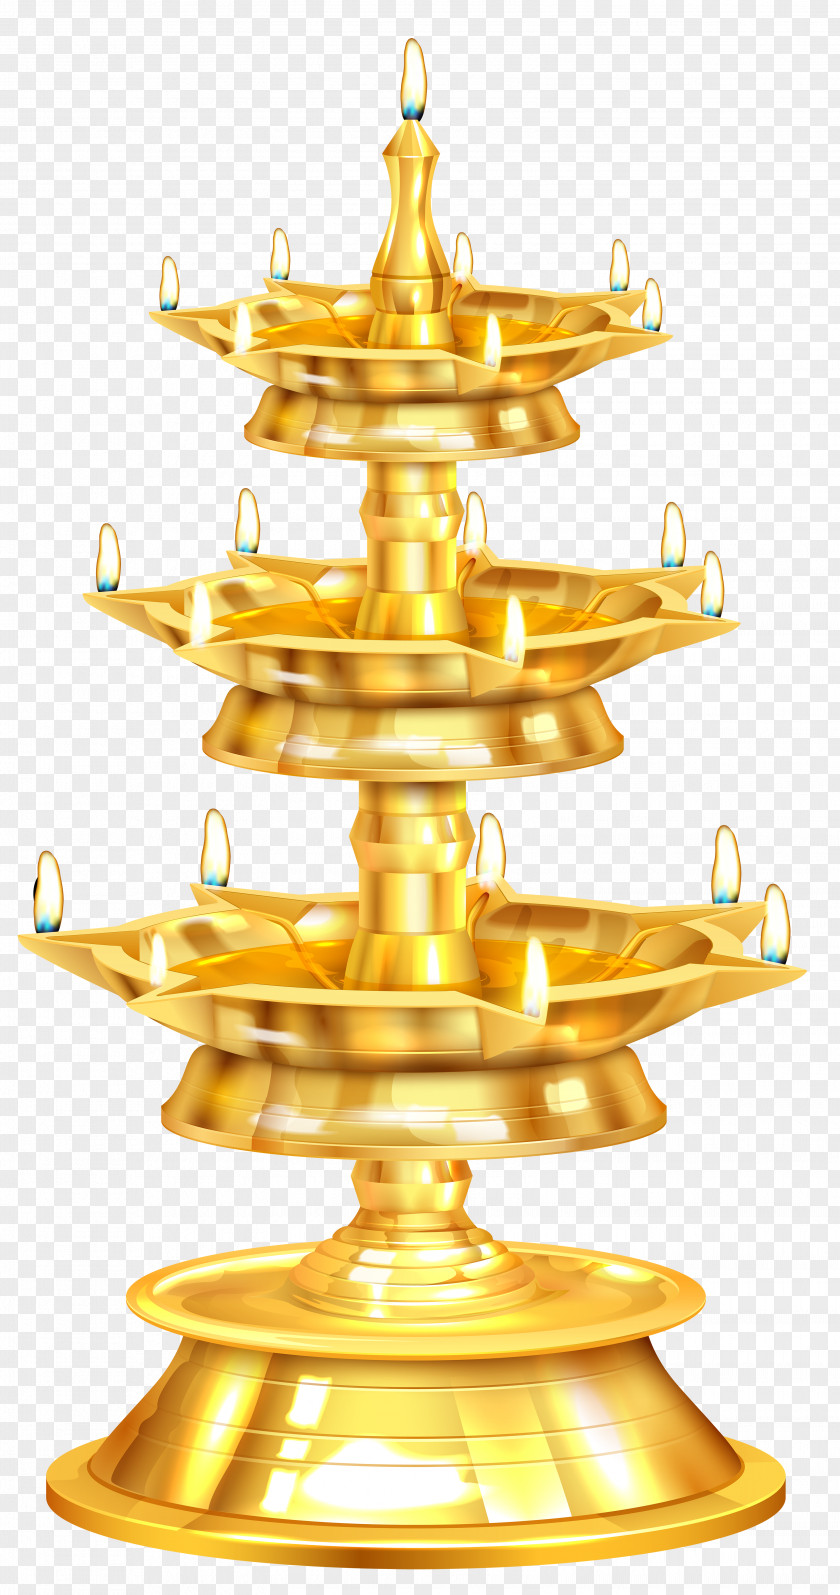 Happy Diwali Candlestick Free Clip Art Image PNG